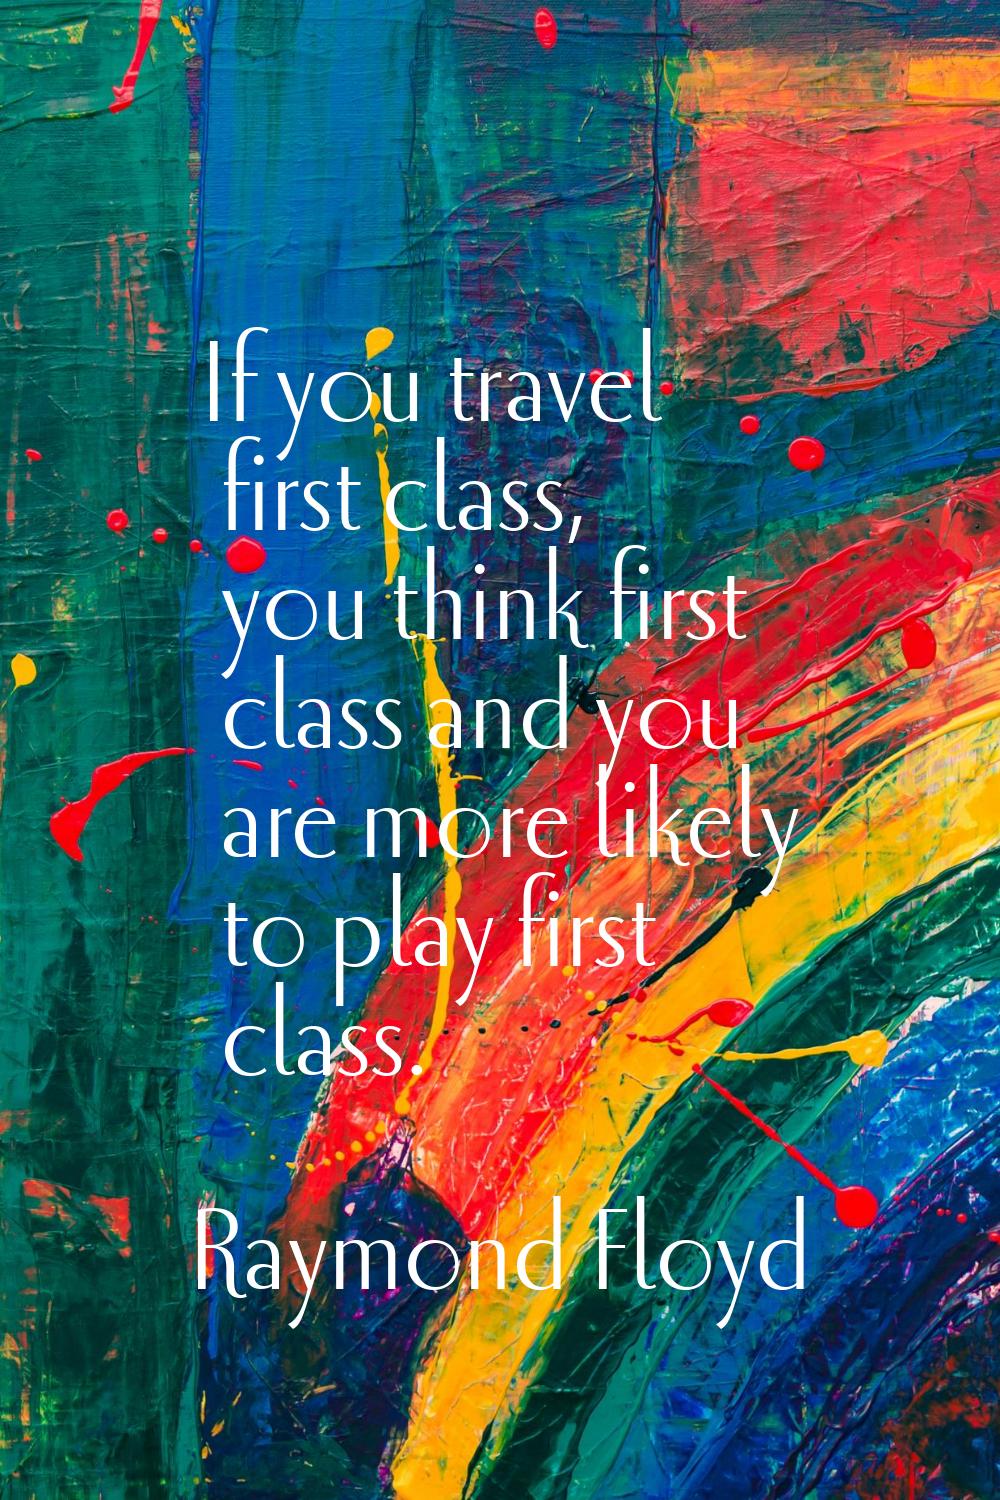 If you travel first class, you think first class and you are more likely to play first class.